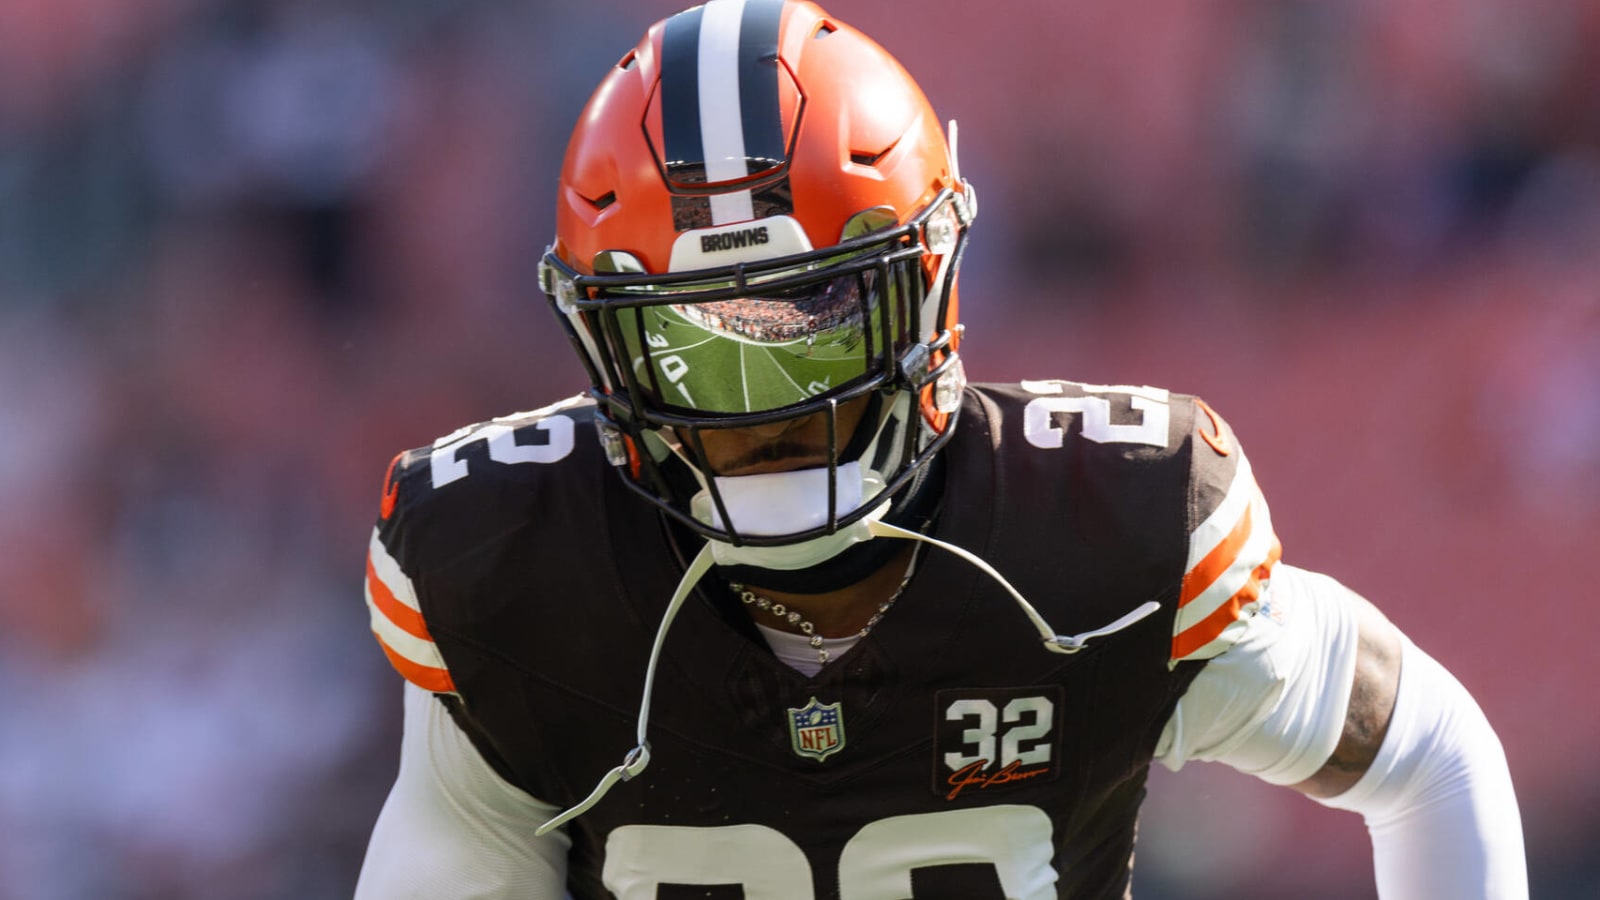 Browns place starting safety on IR, DE out for season